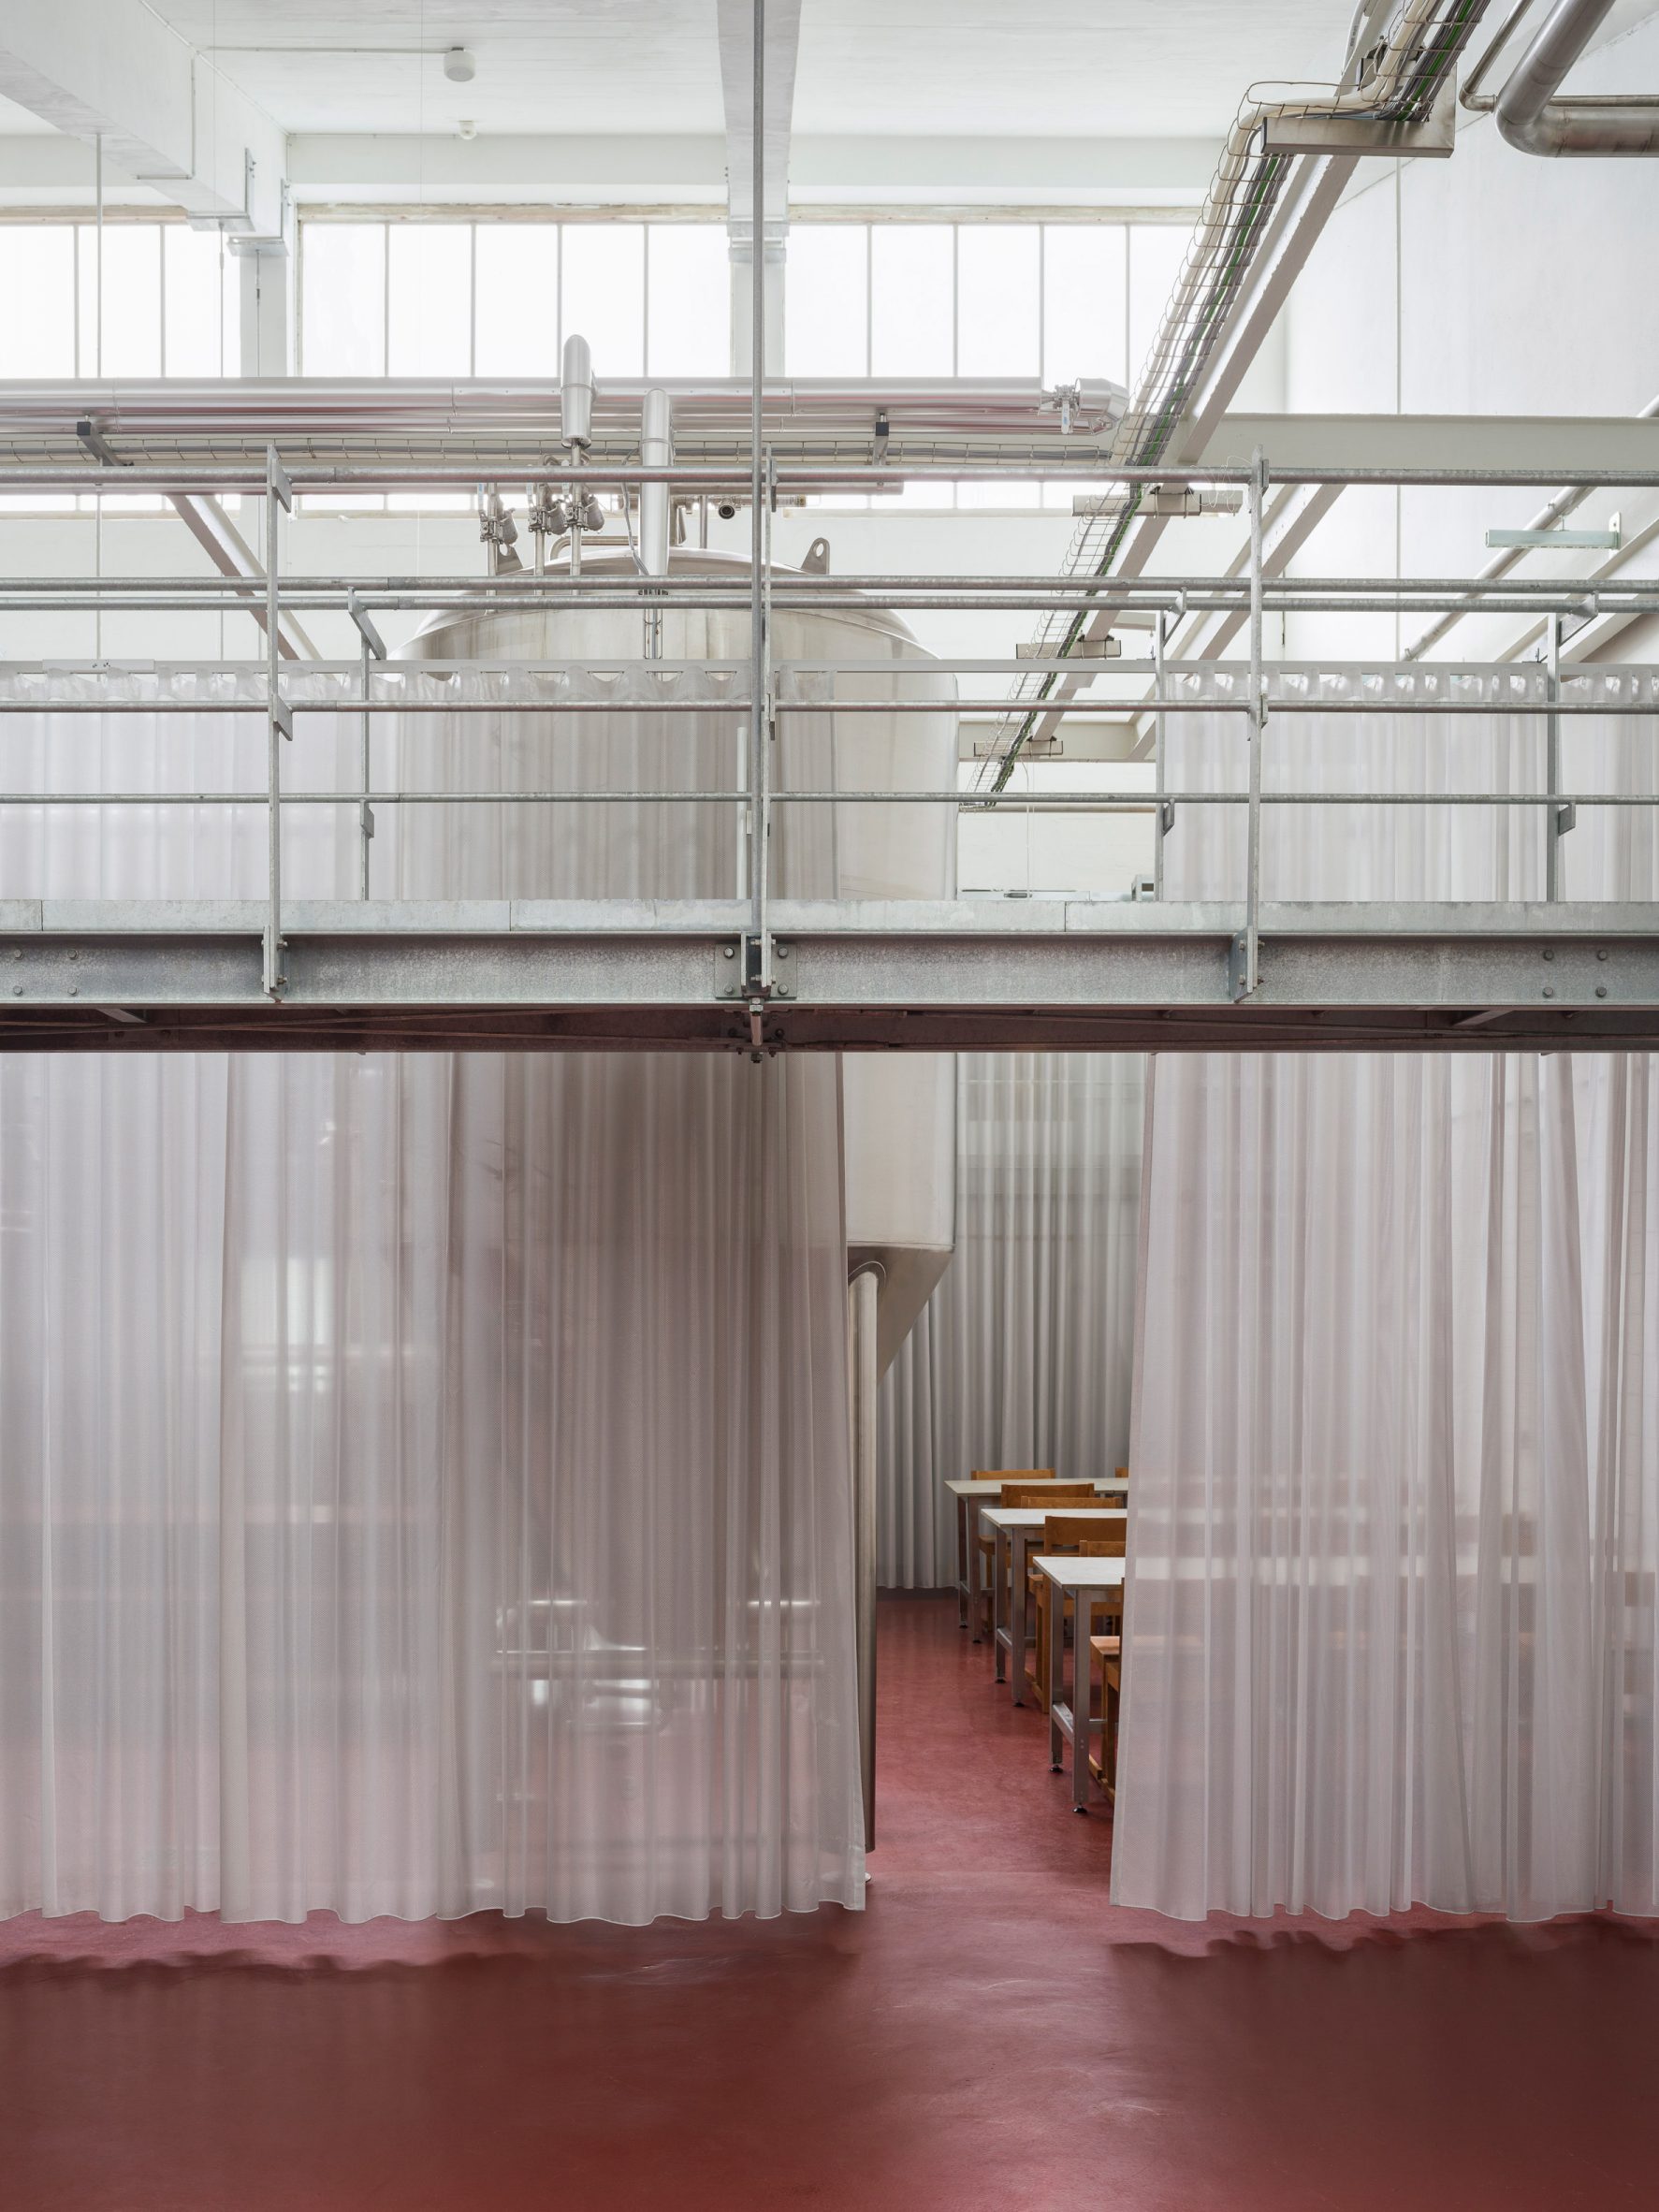 Semitransparent curtains within brewery designed by Pihlmann Architects